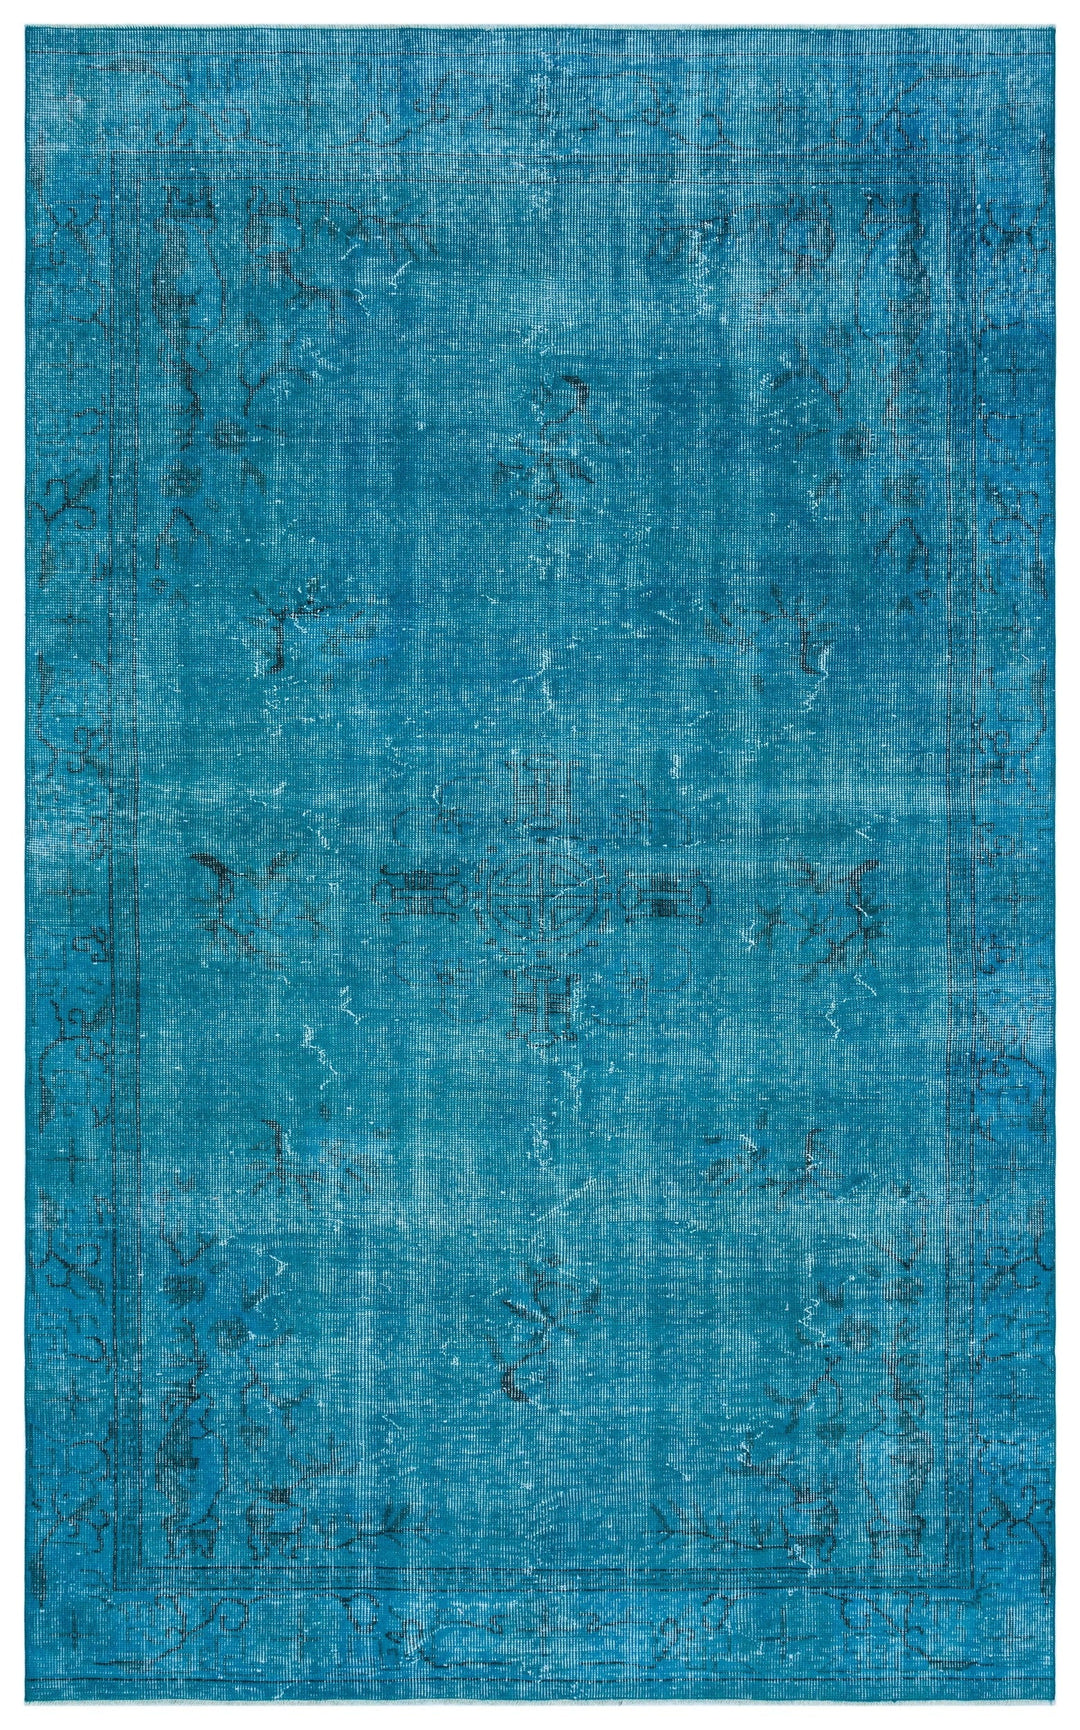 Athens Turquoise Tumbled Wool Hand Woven Carpet 169 x 274